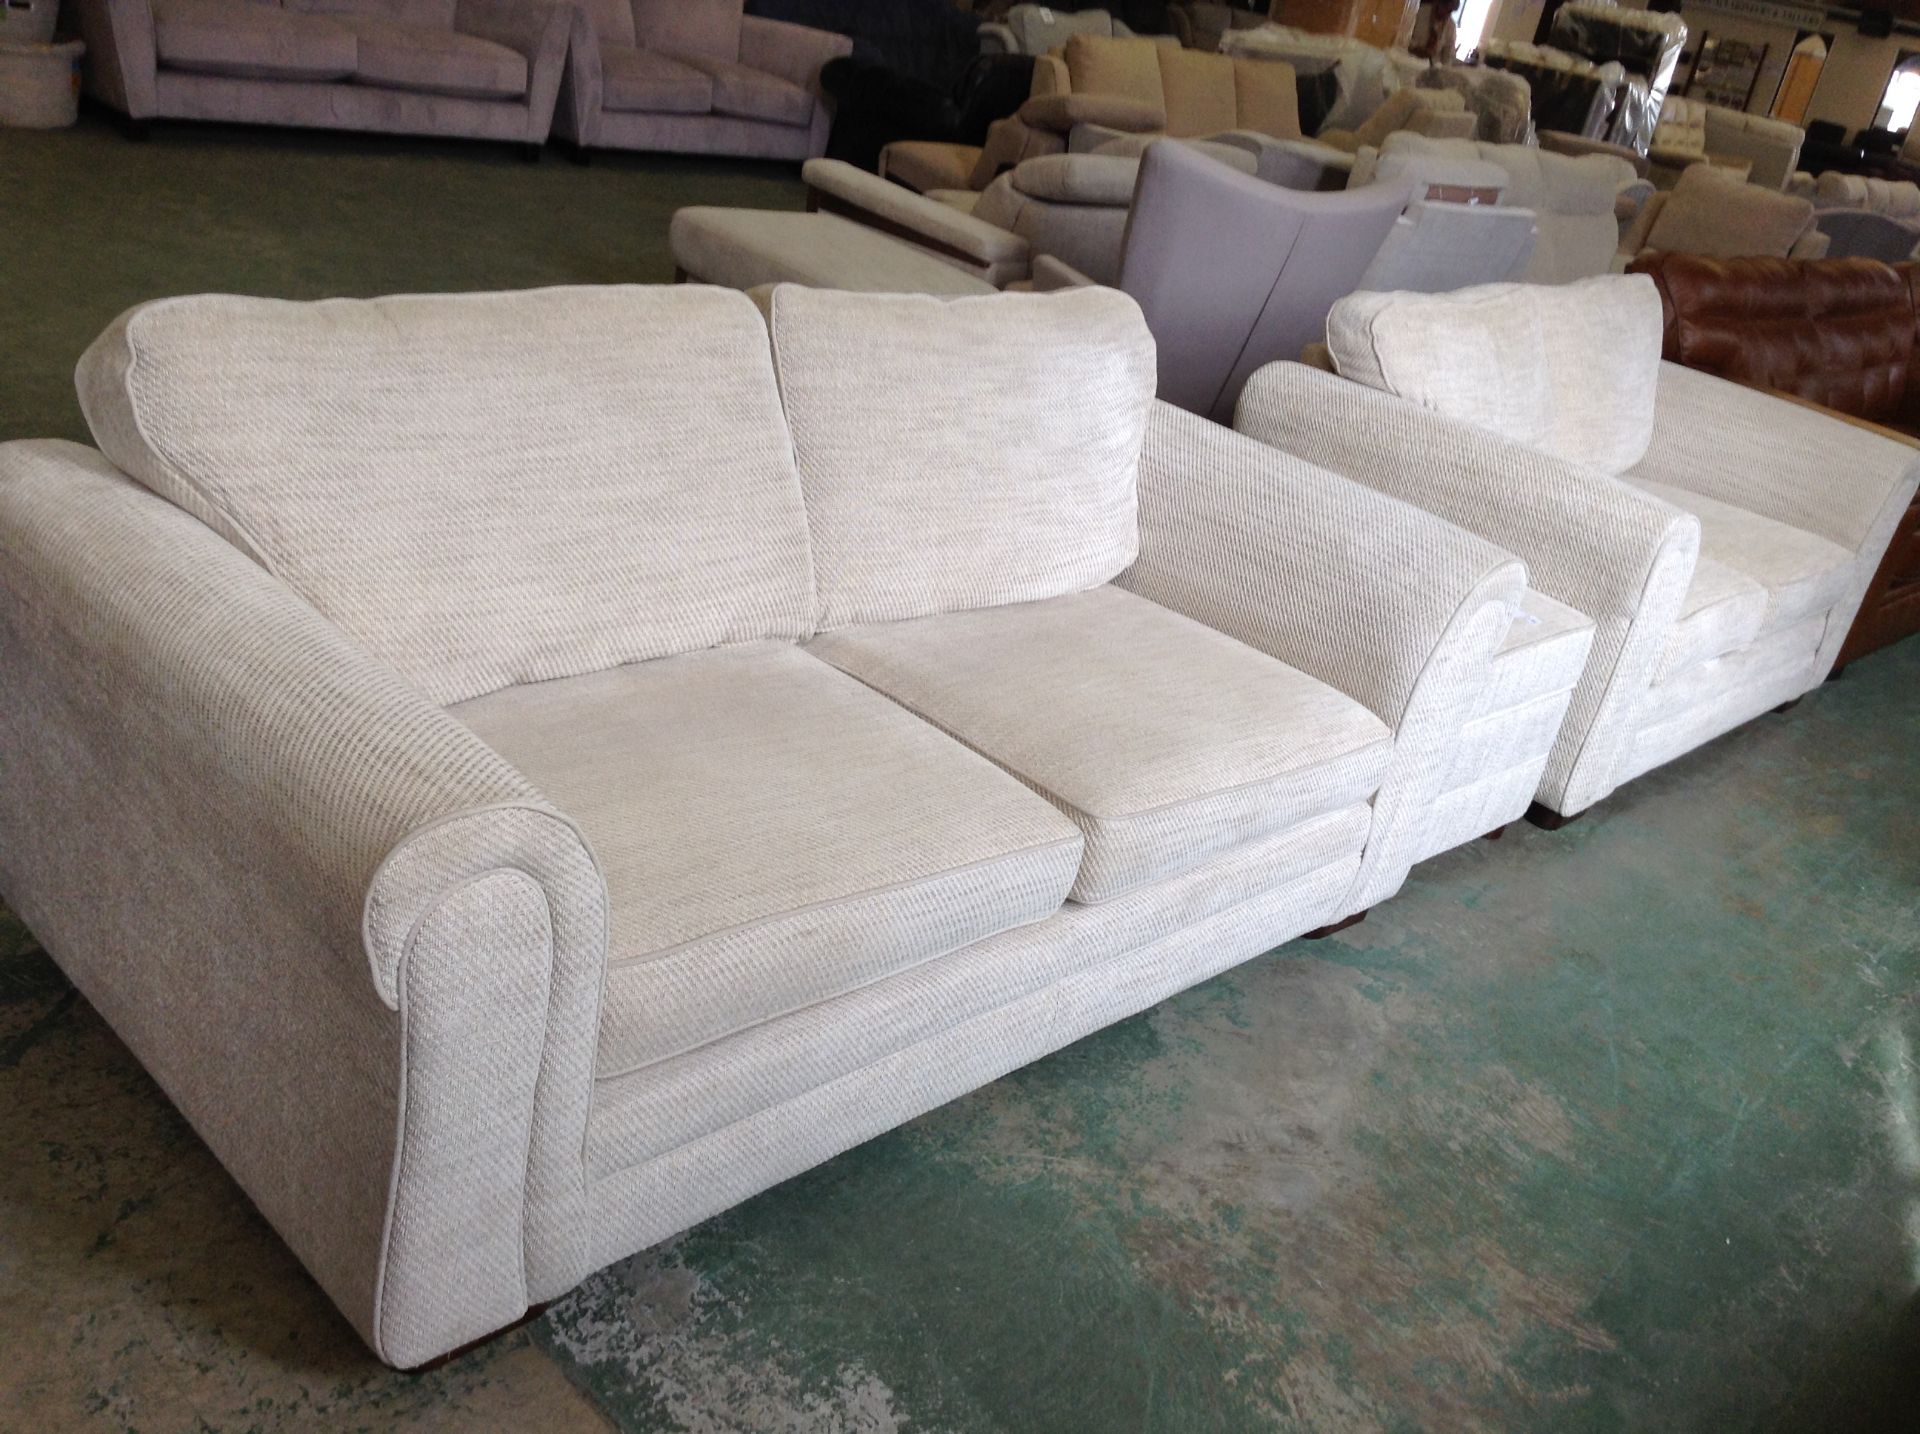 BISCUIT 3 SEATER SOFA AND 2 SEATER SOFA AND STORAGE FOOTSTOOL (5089-5091)